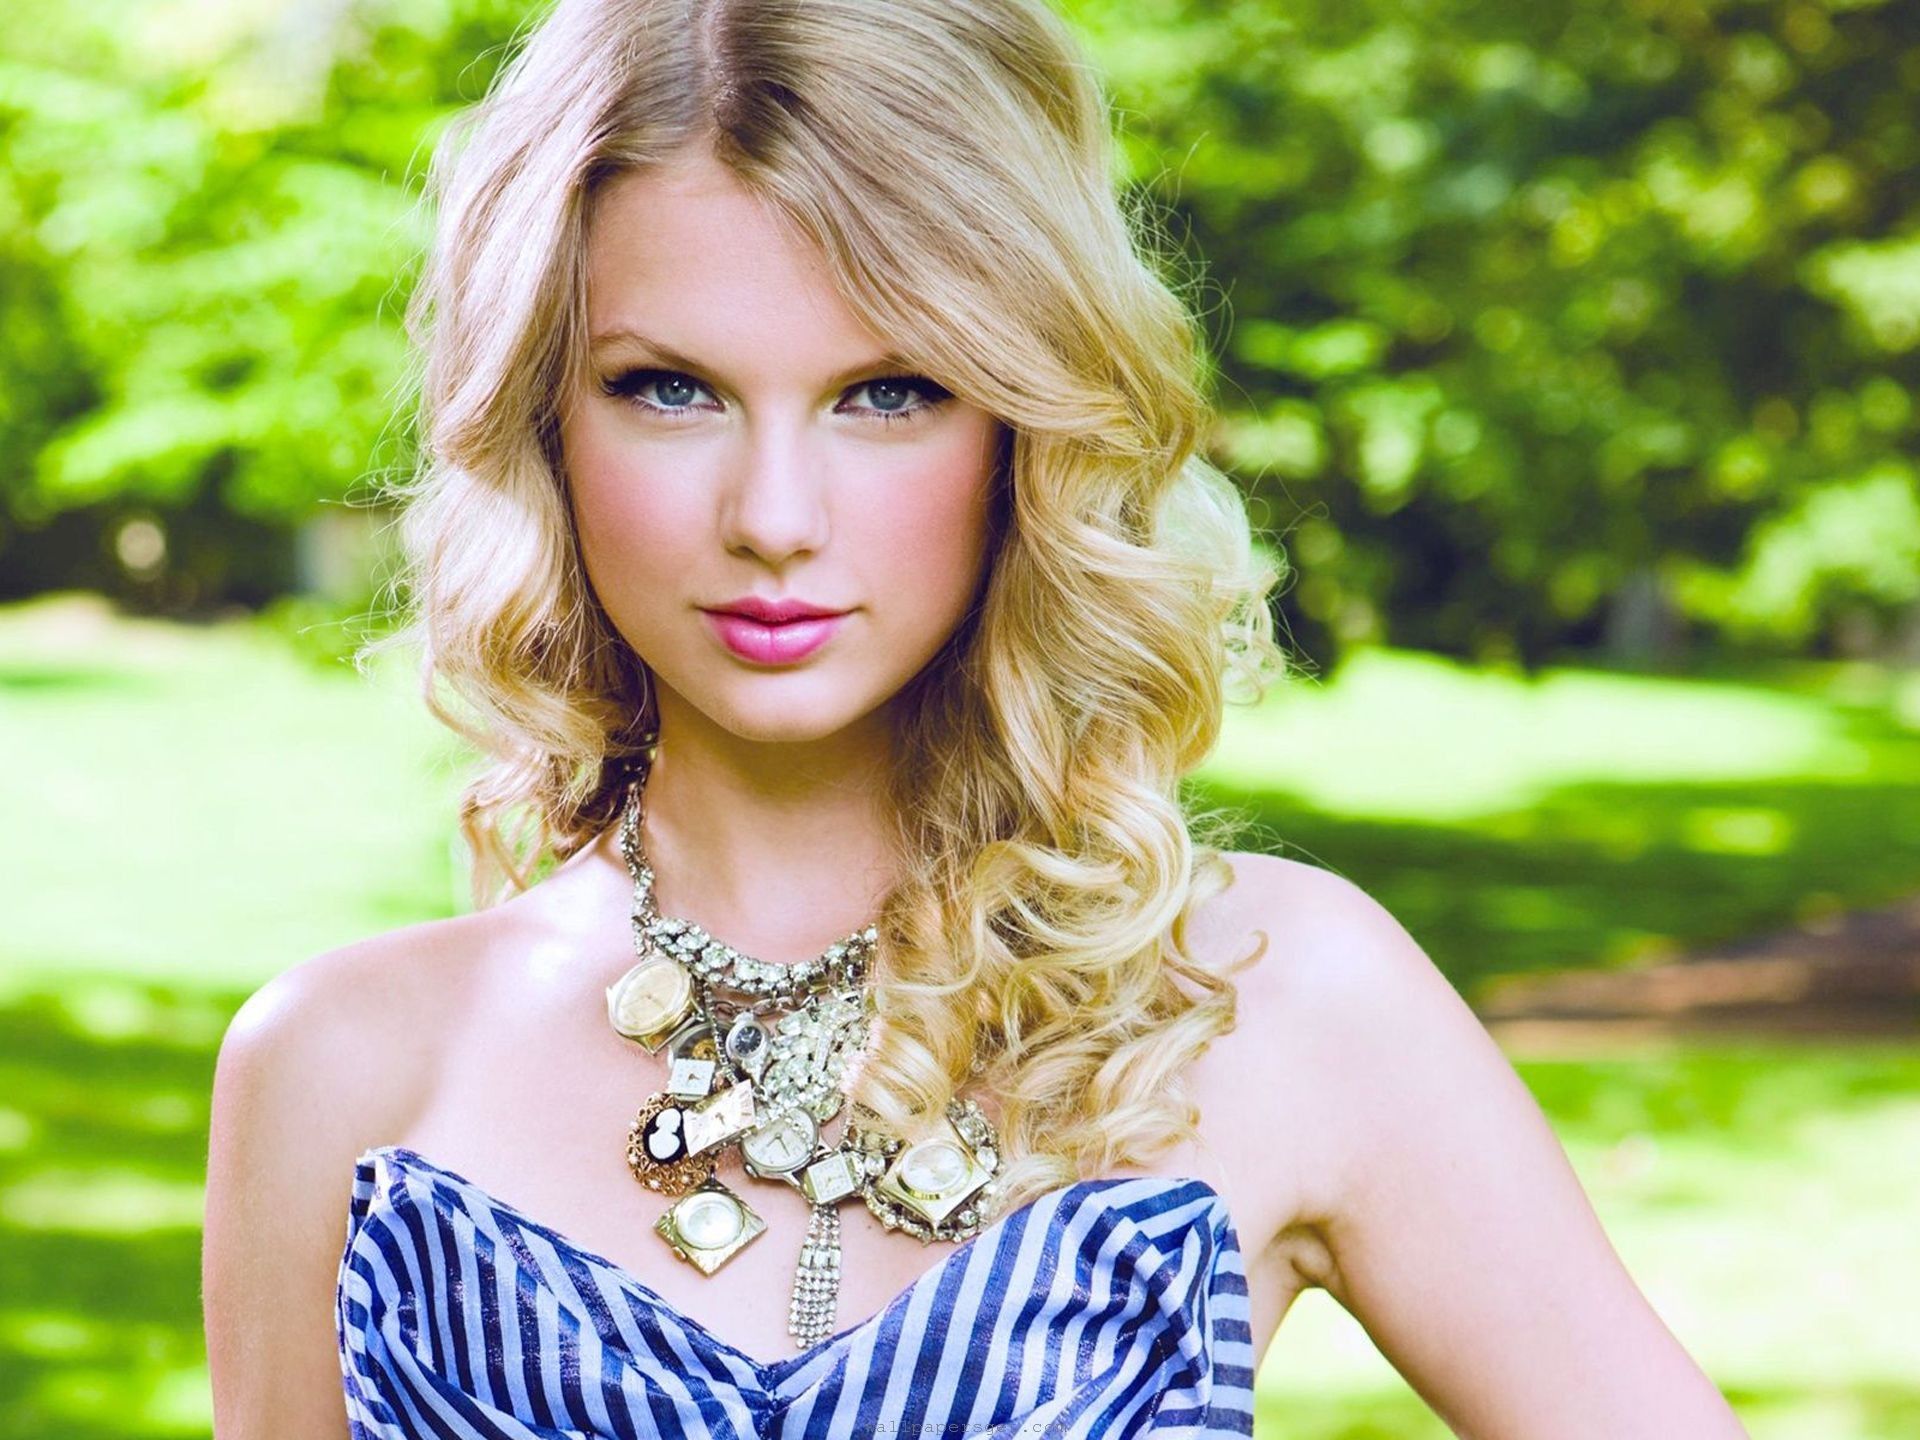 Ile music singer blonde sunny blue eyes taylor swift download the picture for free